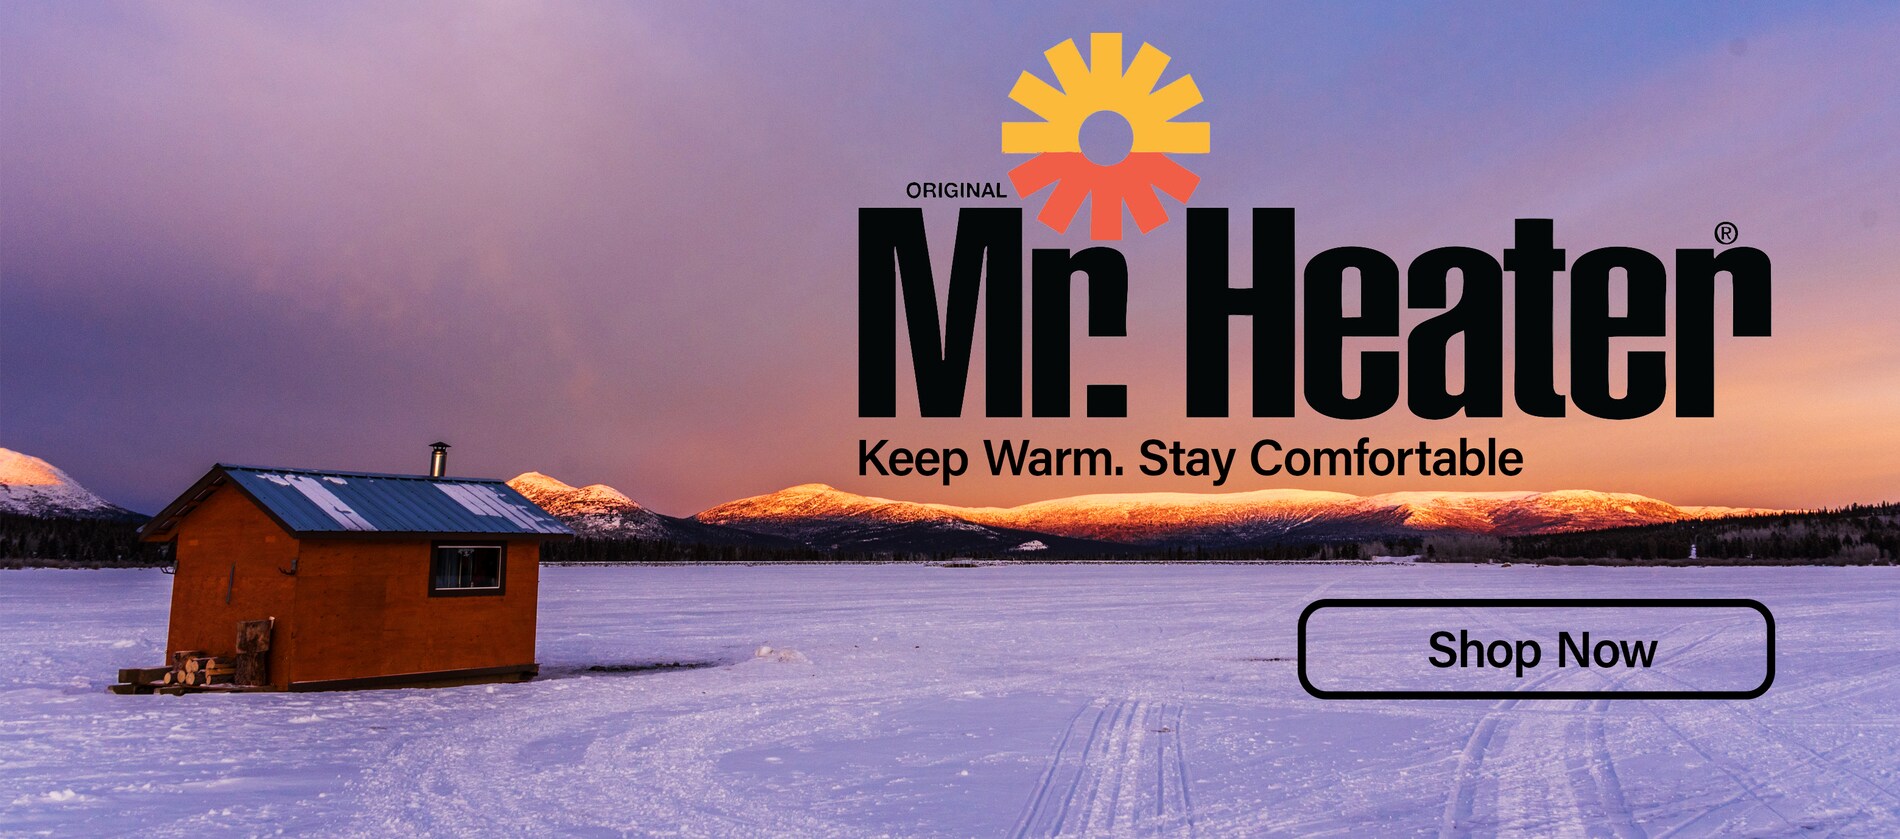 Mr. Heater - Heat up your day on the ice with the Mr.